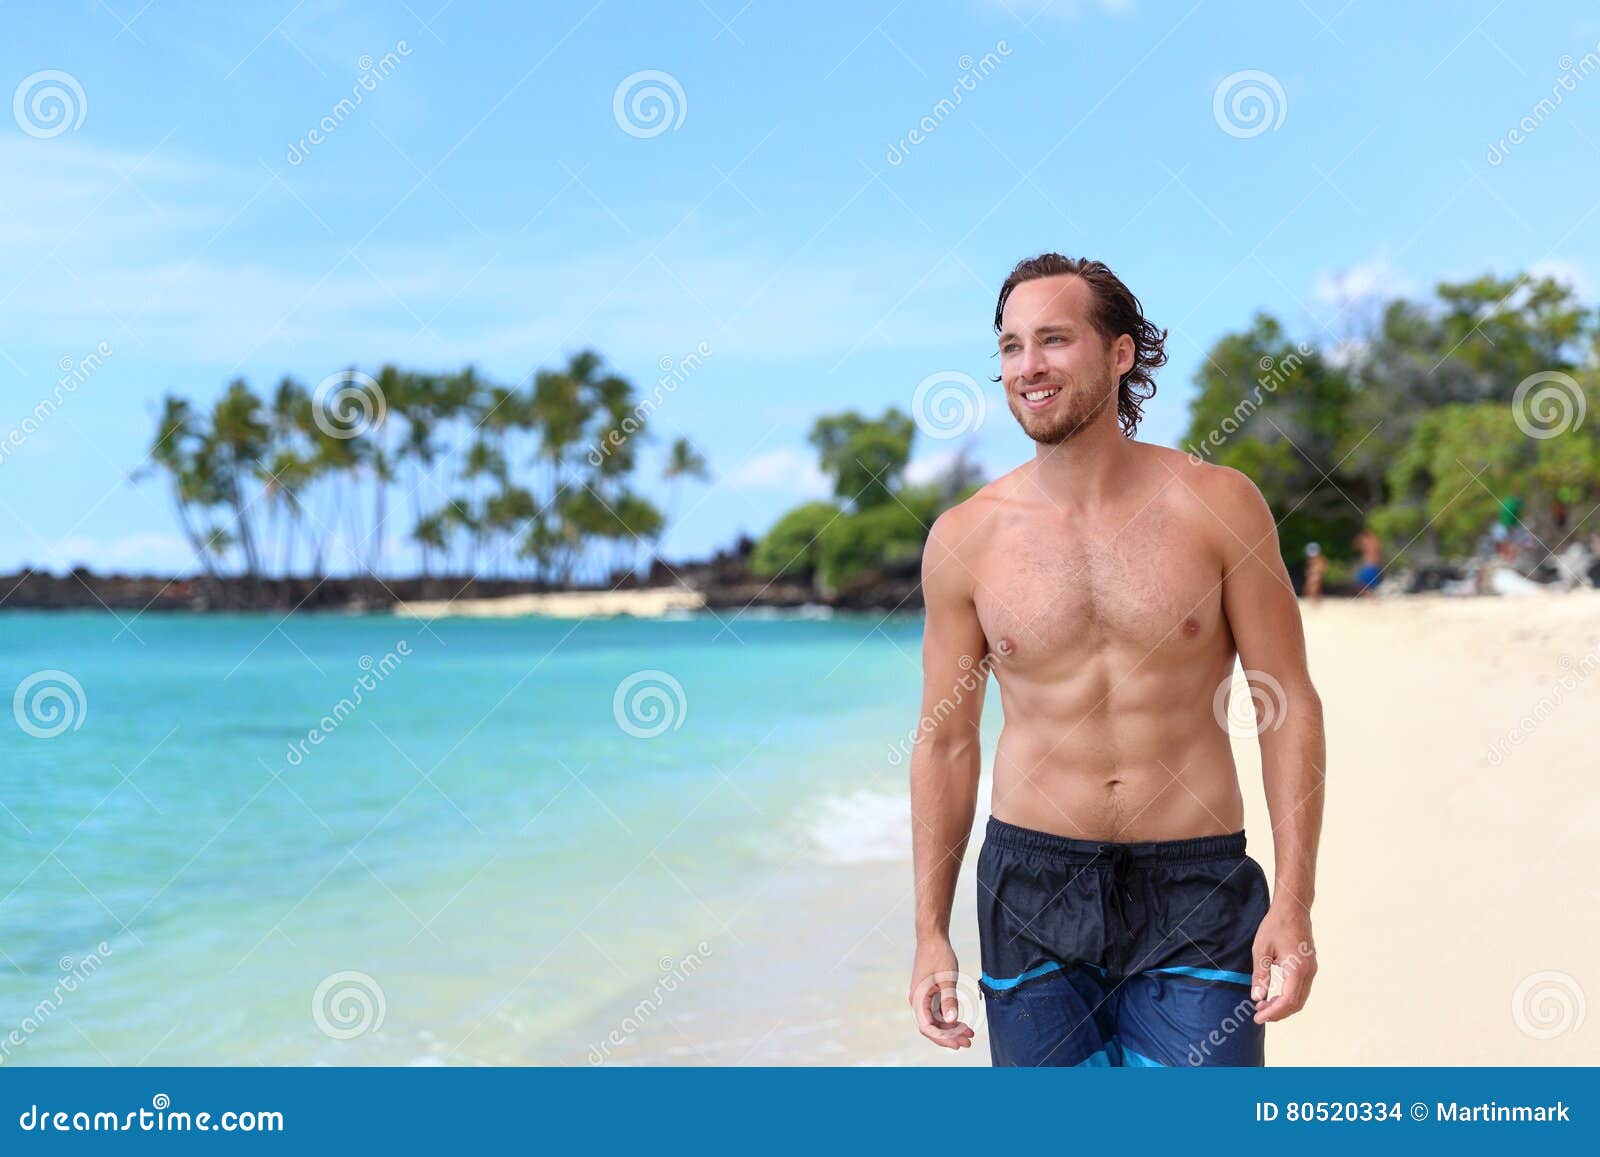 13,700+ Man Swimming Trunks Stock Photos, Pictures & Royalty-Free